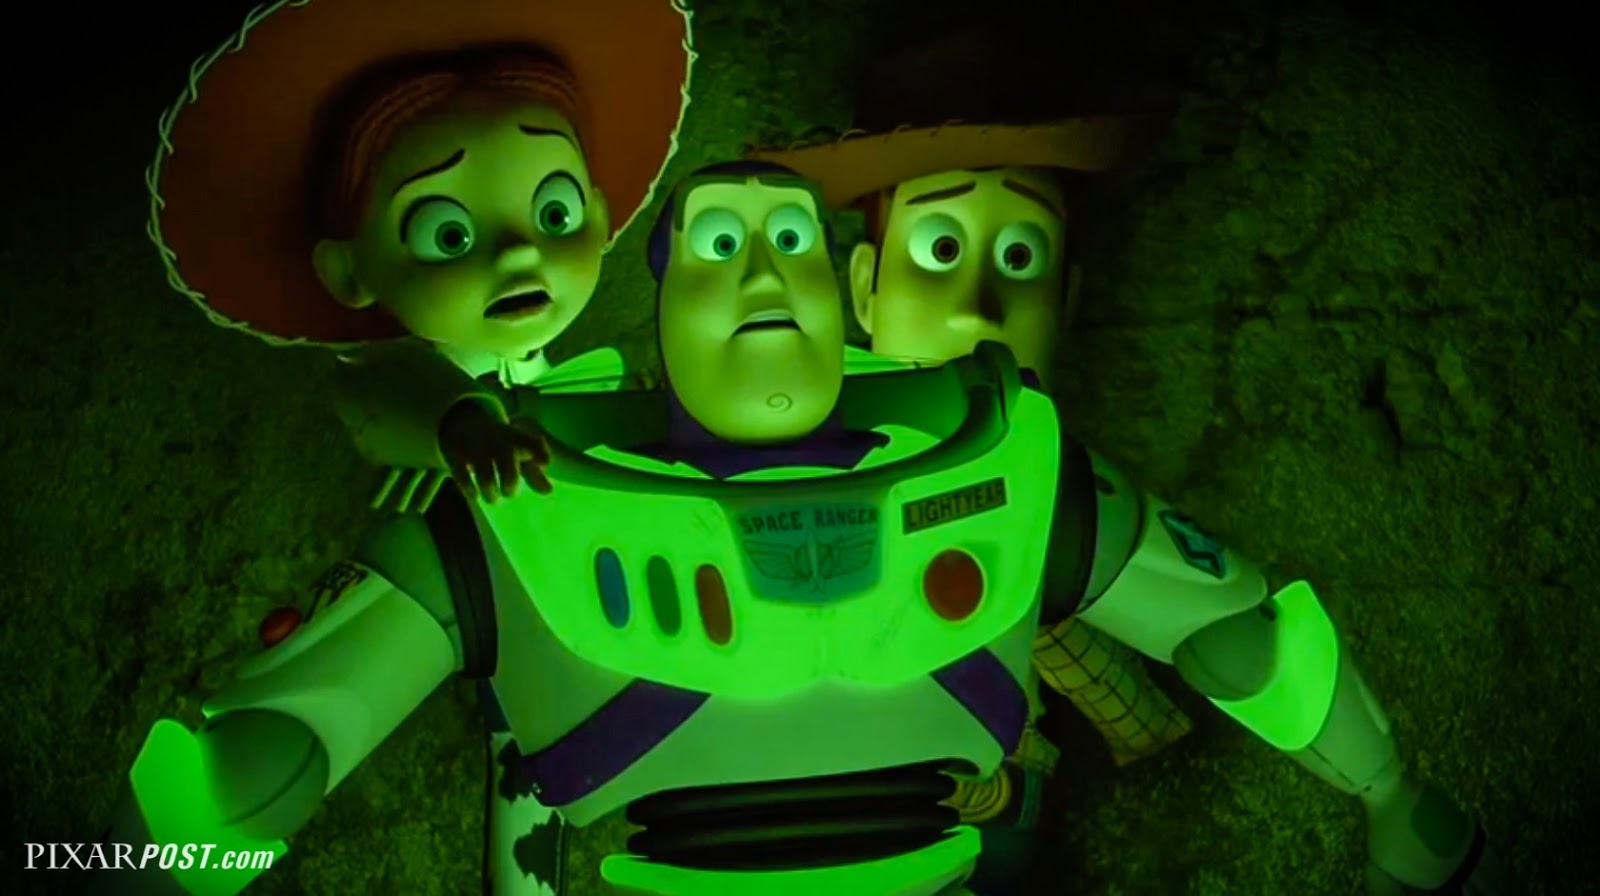 Toy Story Of Terror! #1